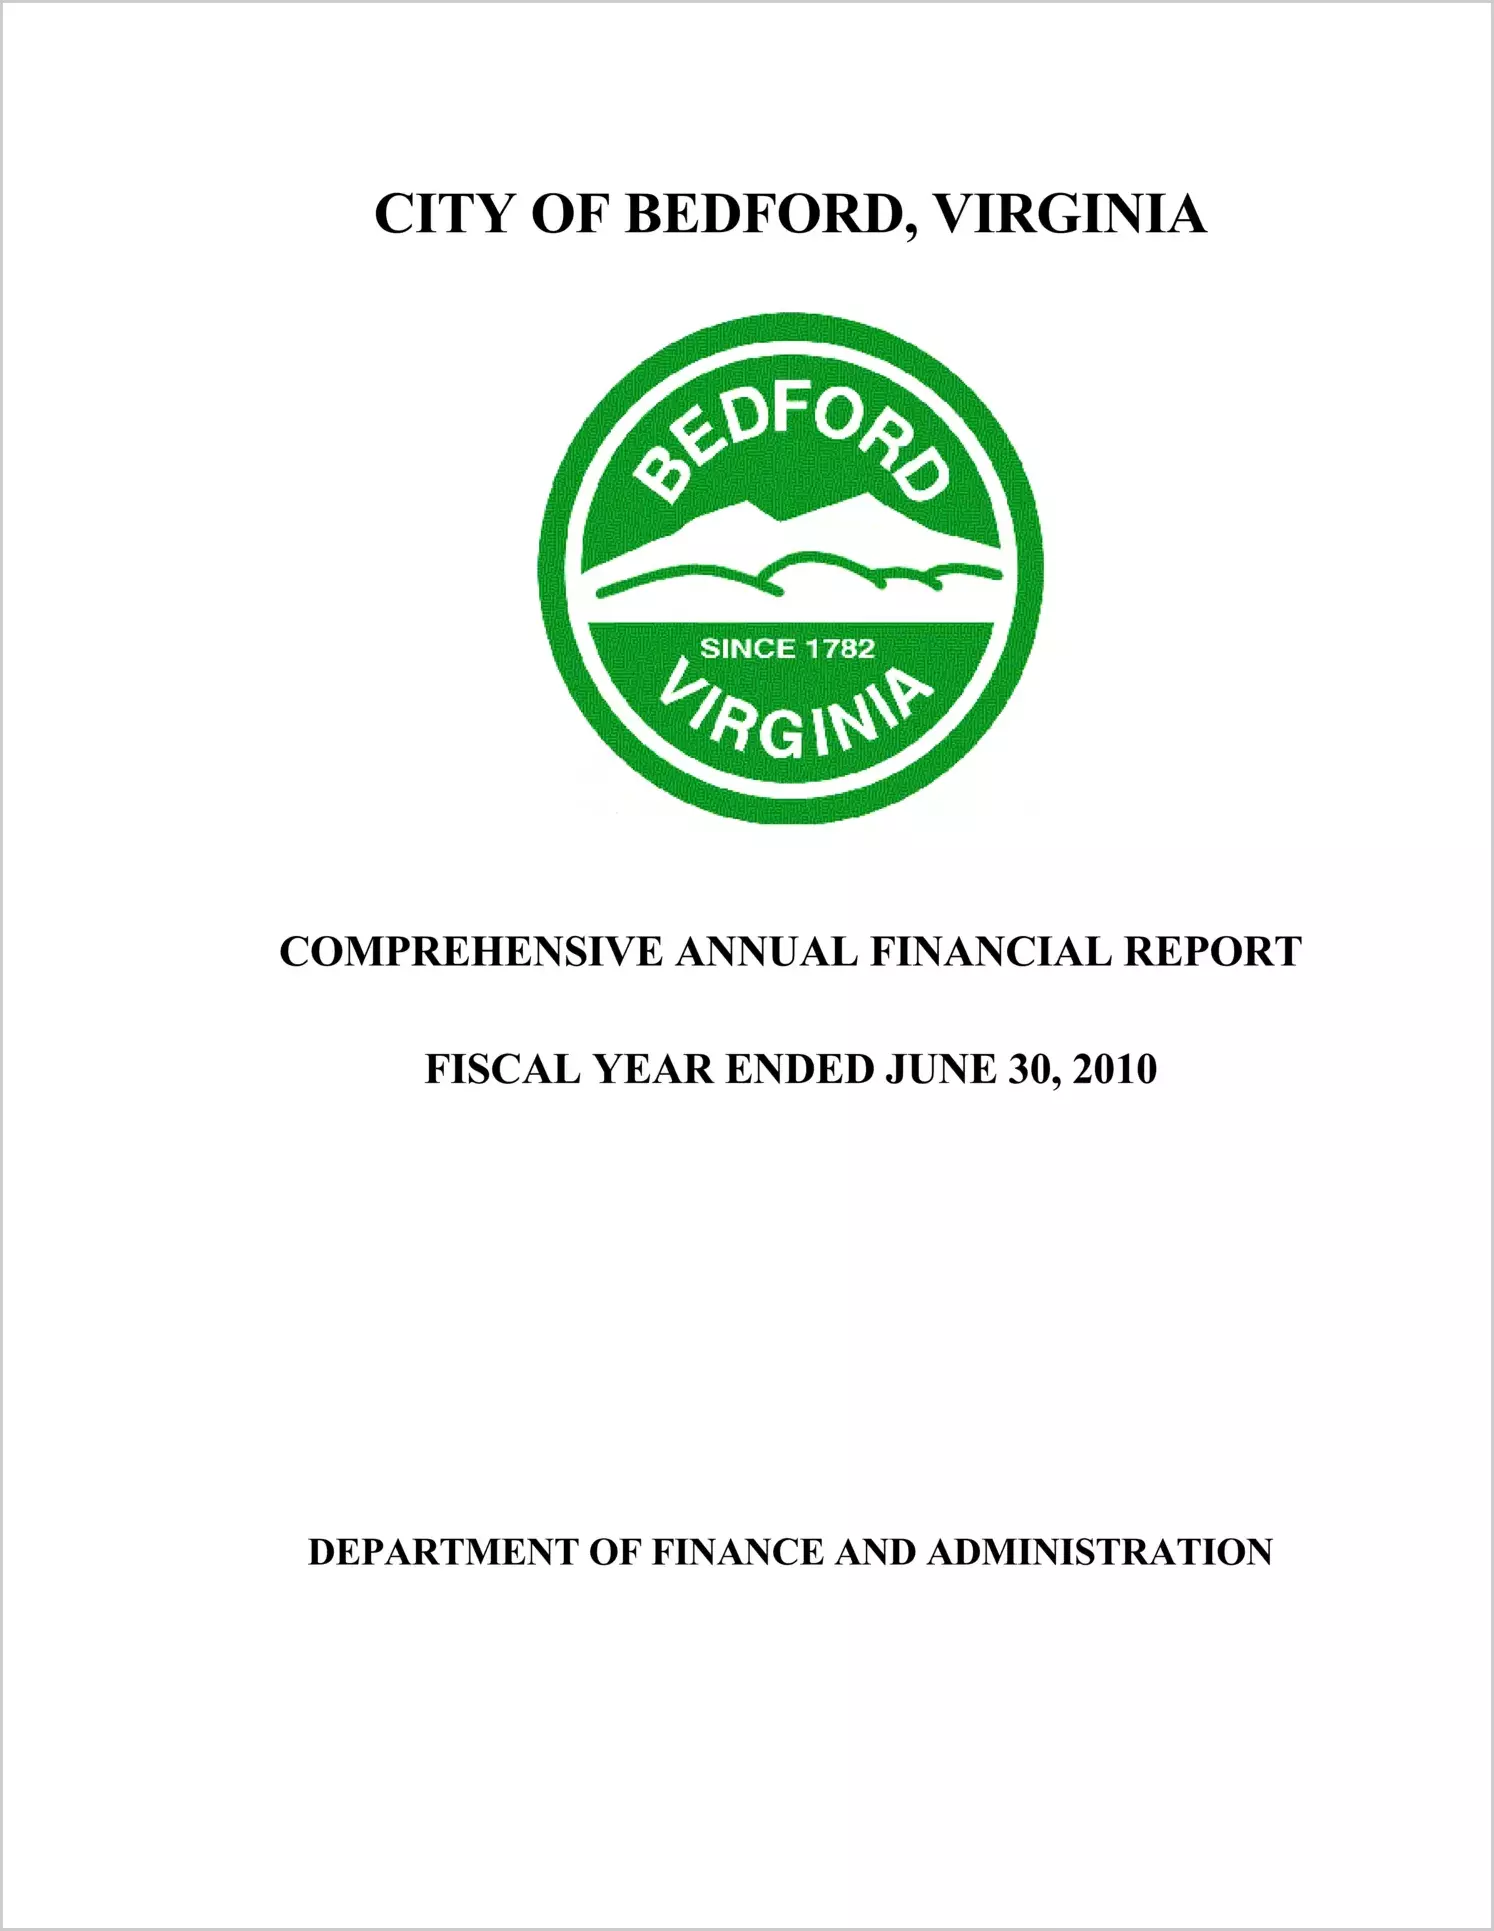 2010 Annual Financial Report for City of Bedford